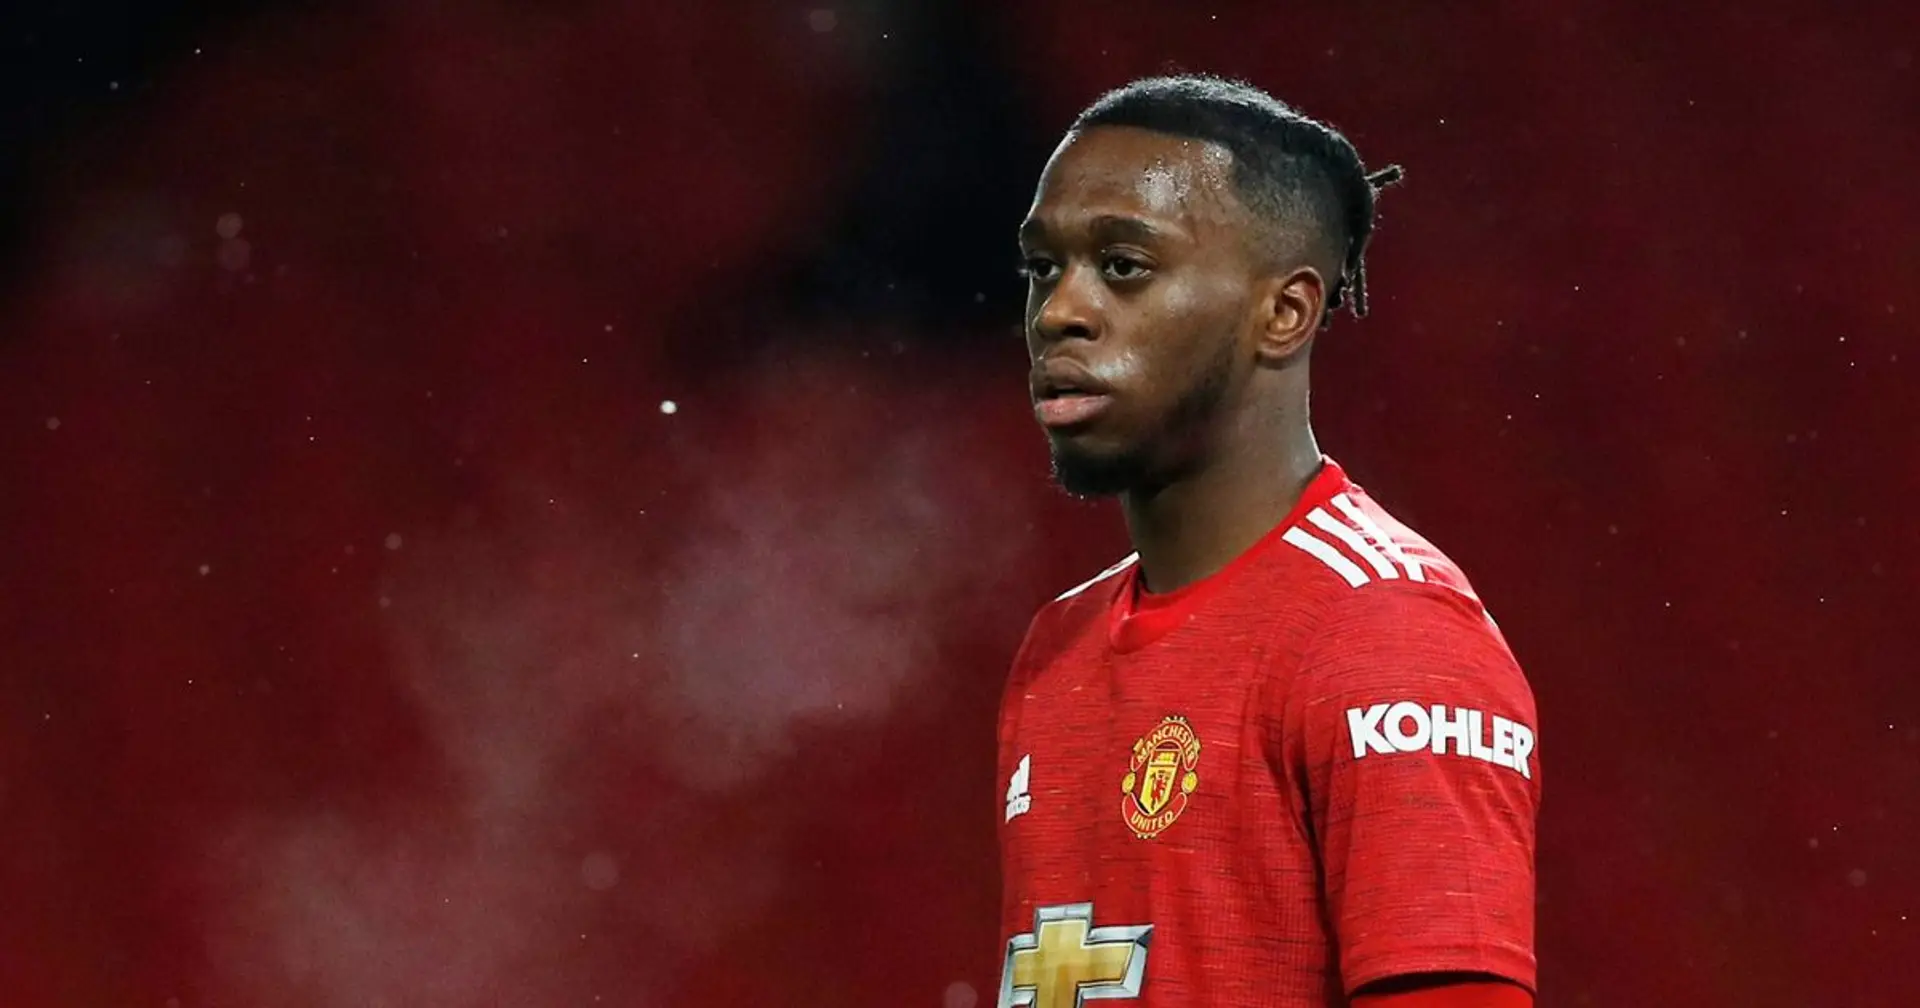 Fabrizio Romano: Man United want to sign right-back to compete with Wan-Bissaka (reliability: 5 stars)